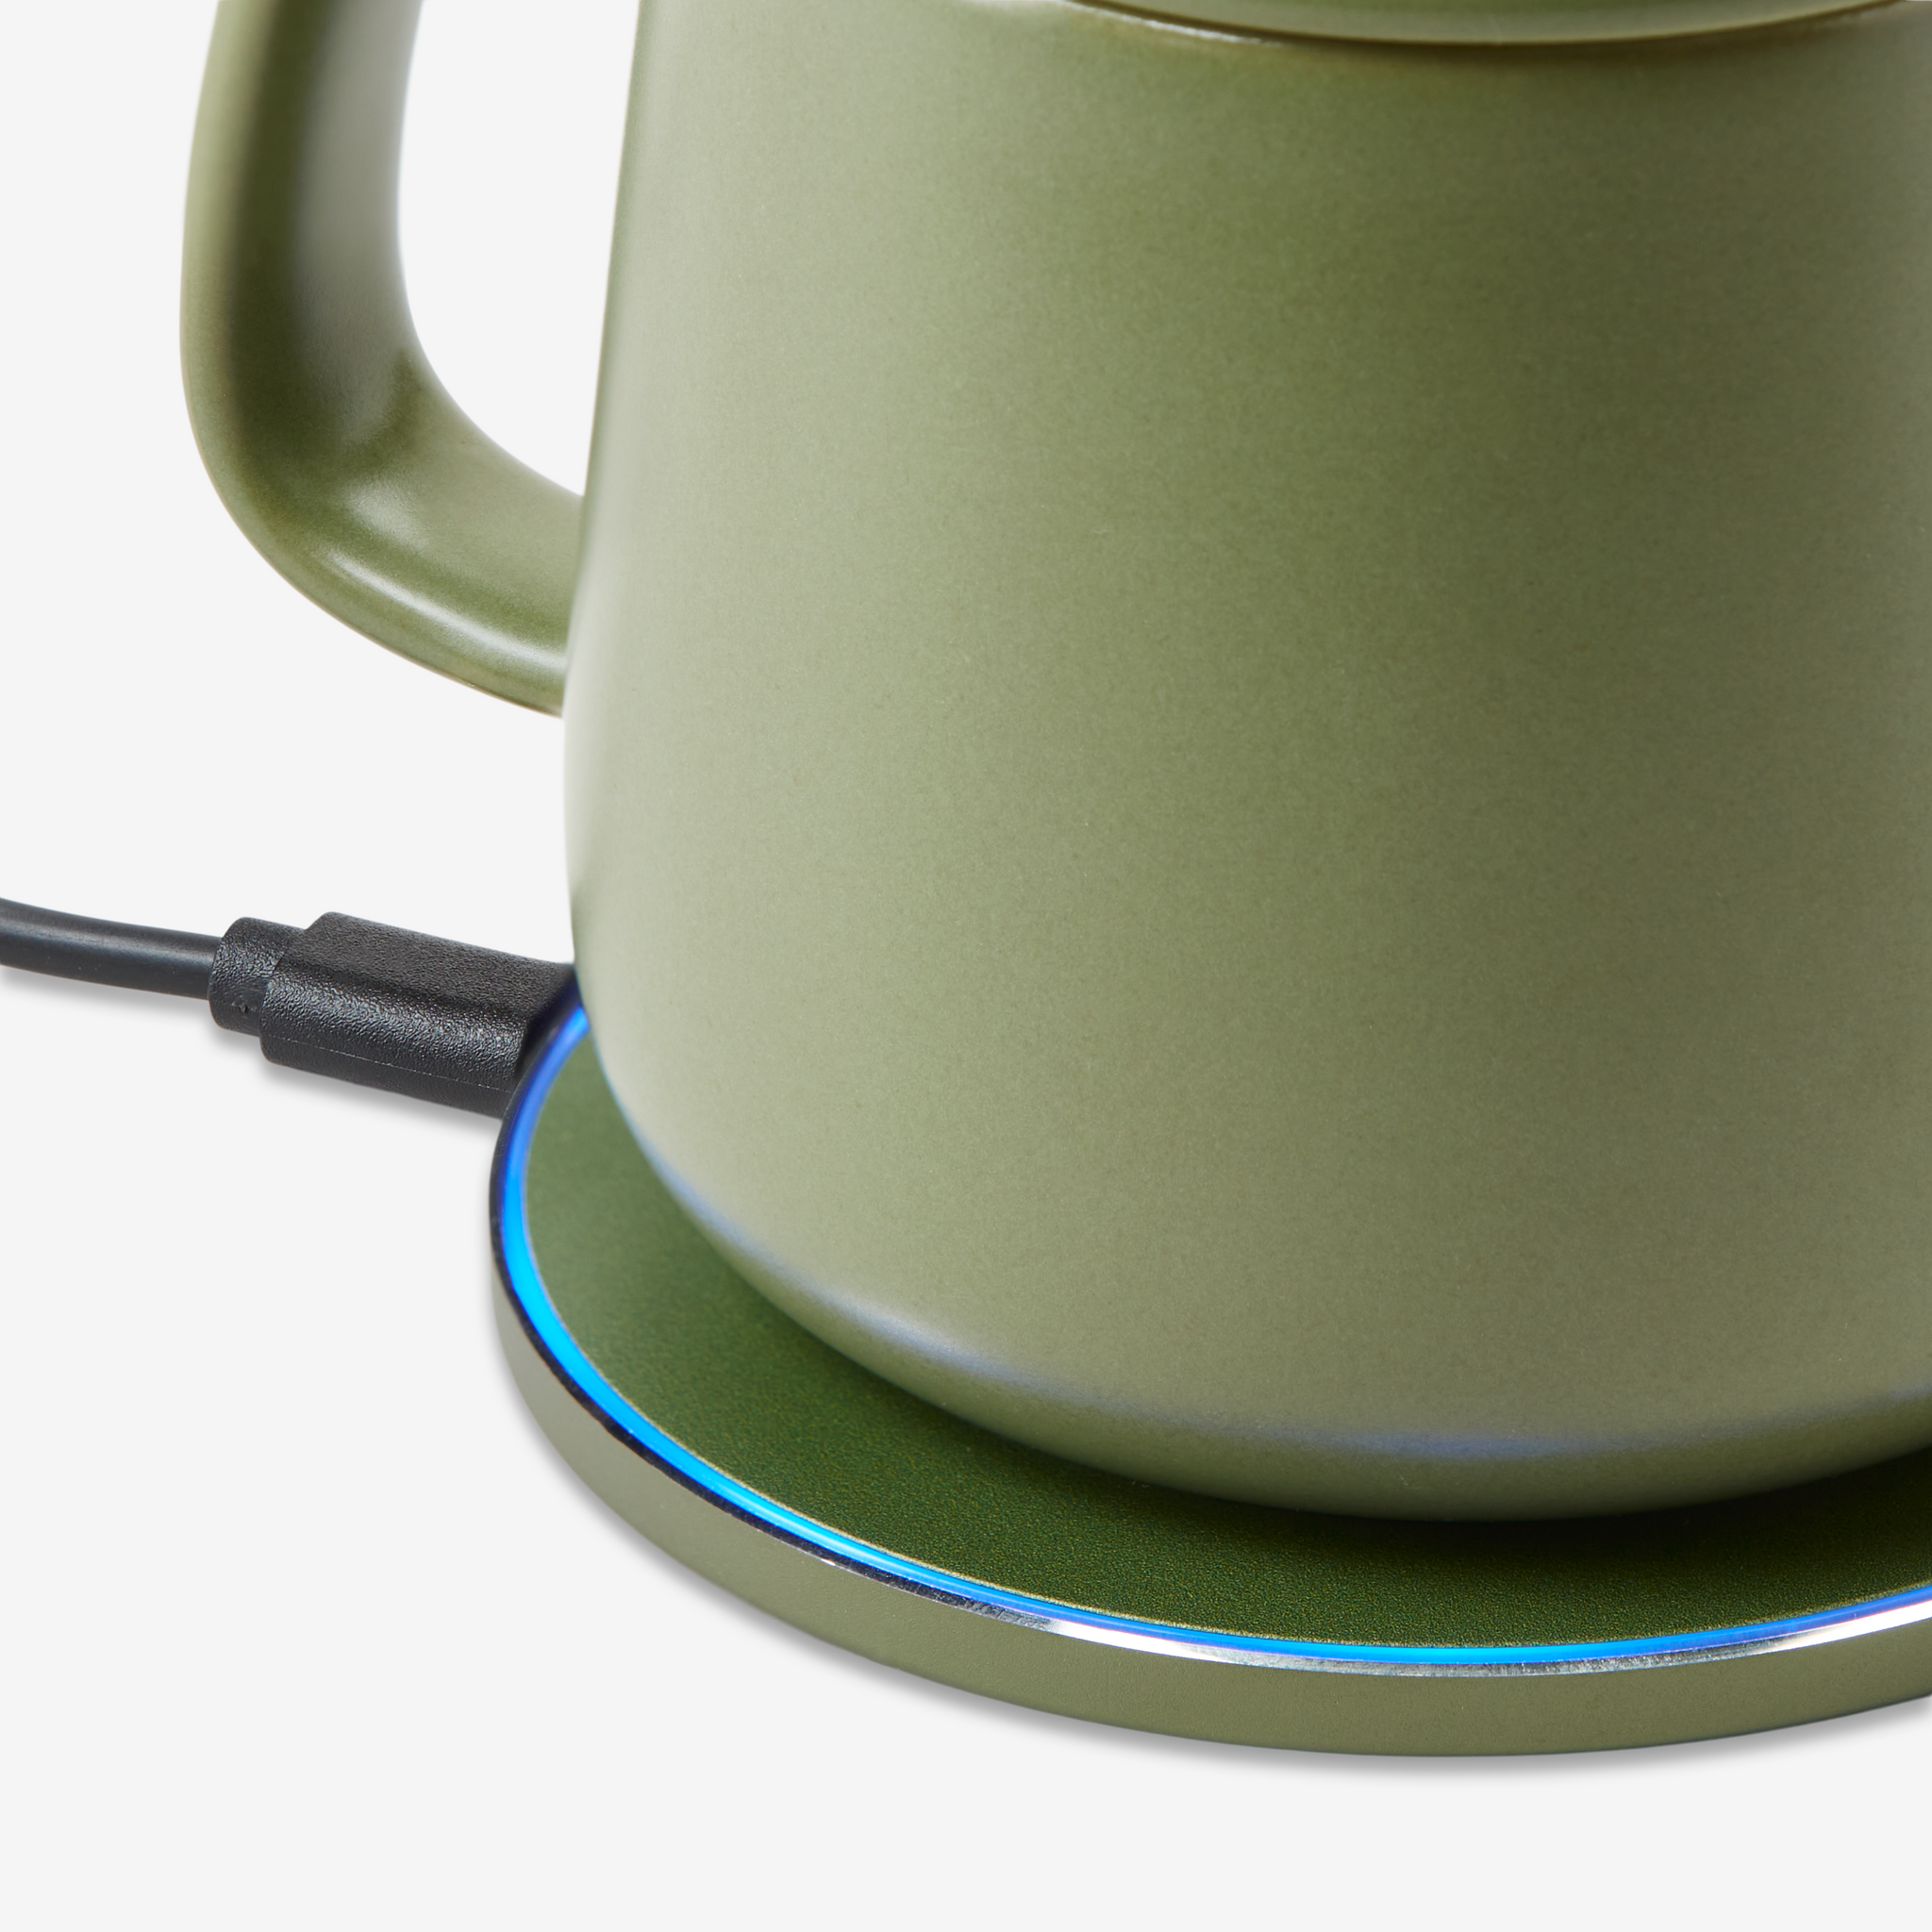 Coffee Mug Warmer With Wireless Charger - Brilliant Promos - Be